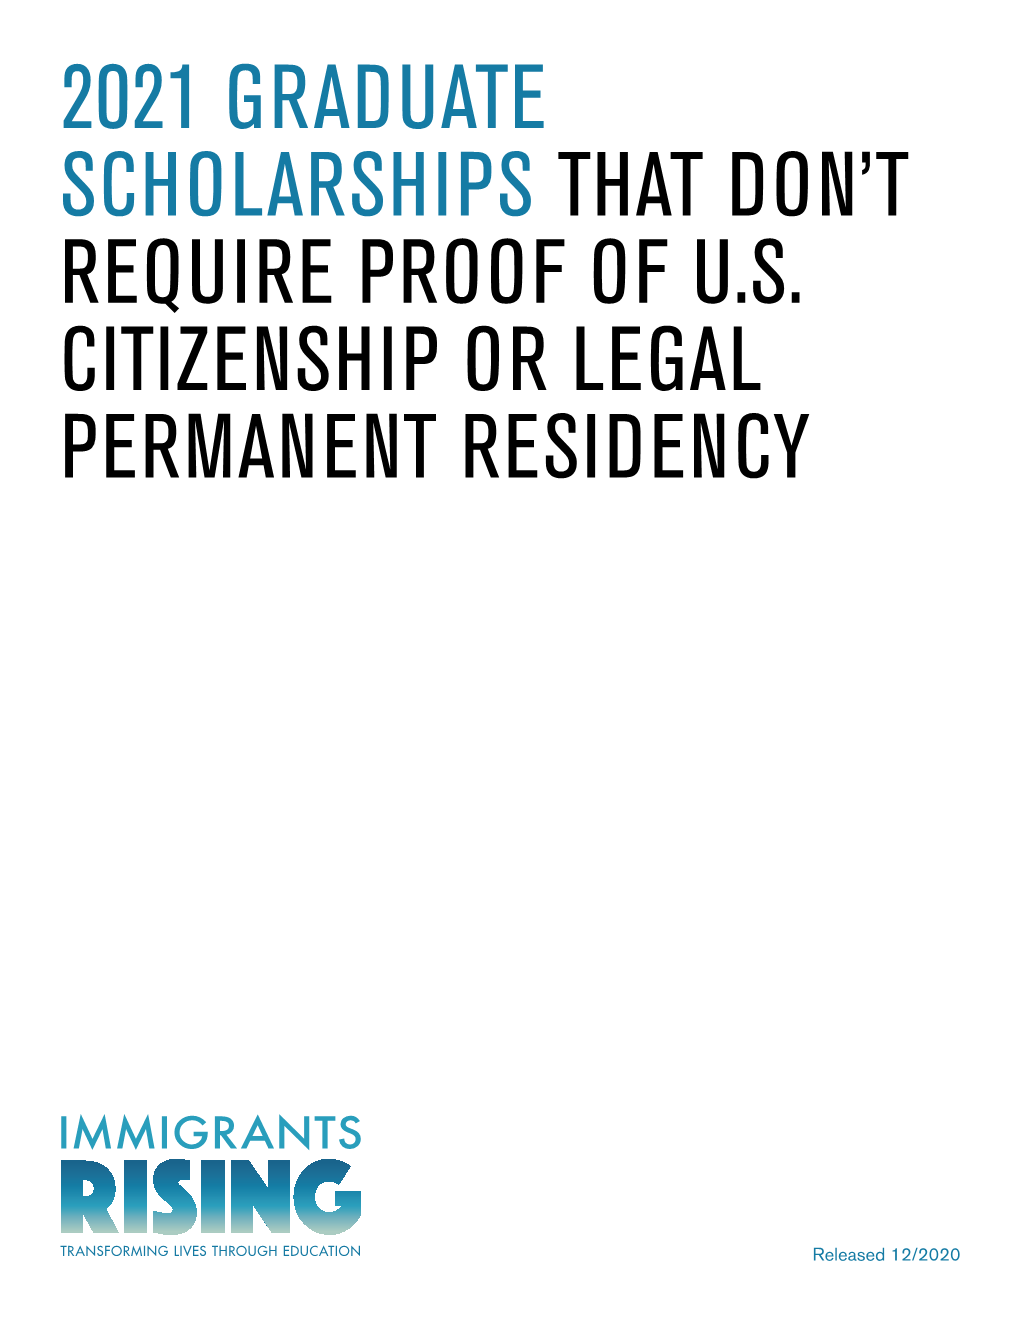 2021 Graduate Scholarships (Don't Require Proof of US Citizenship)